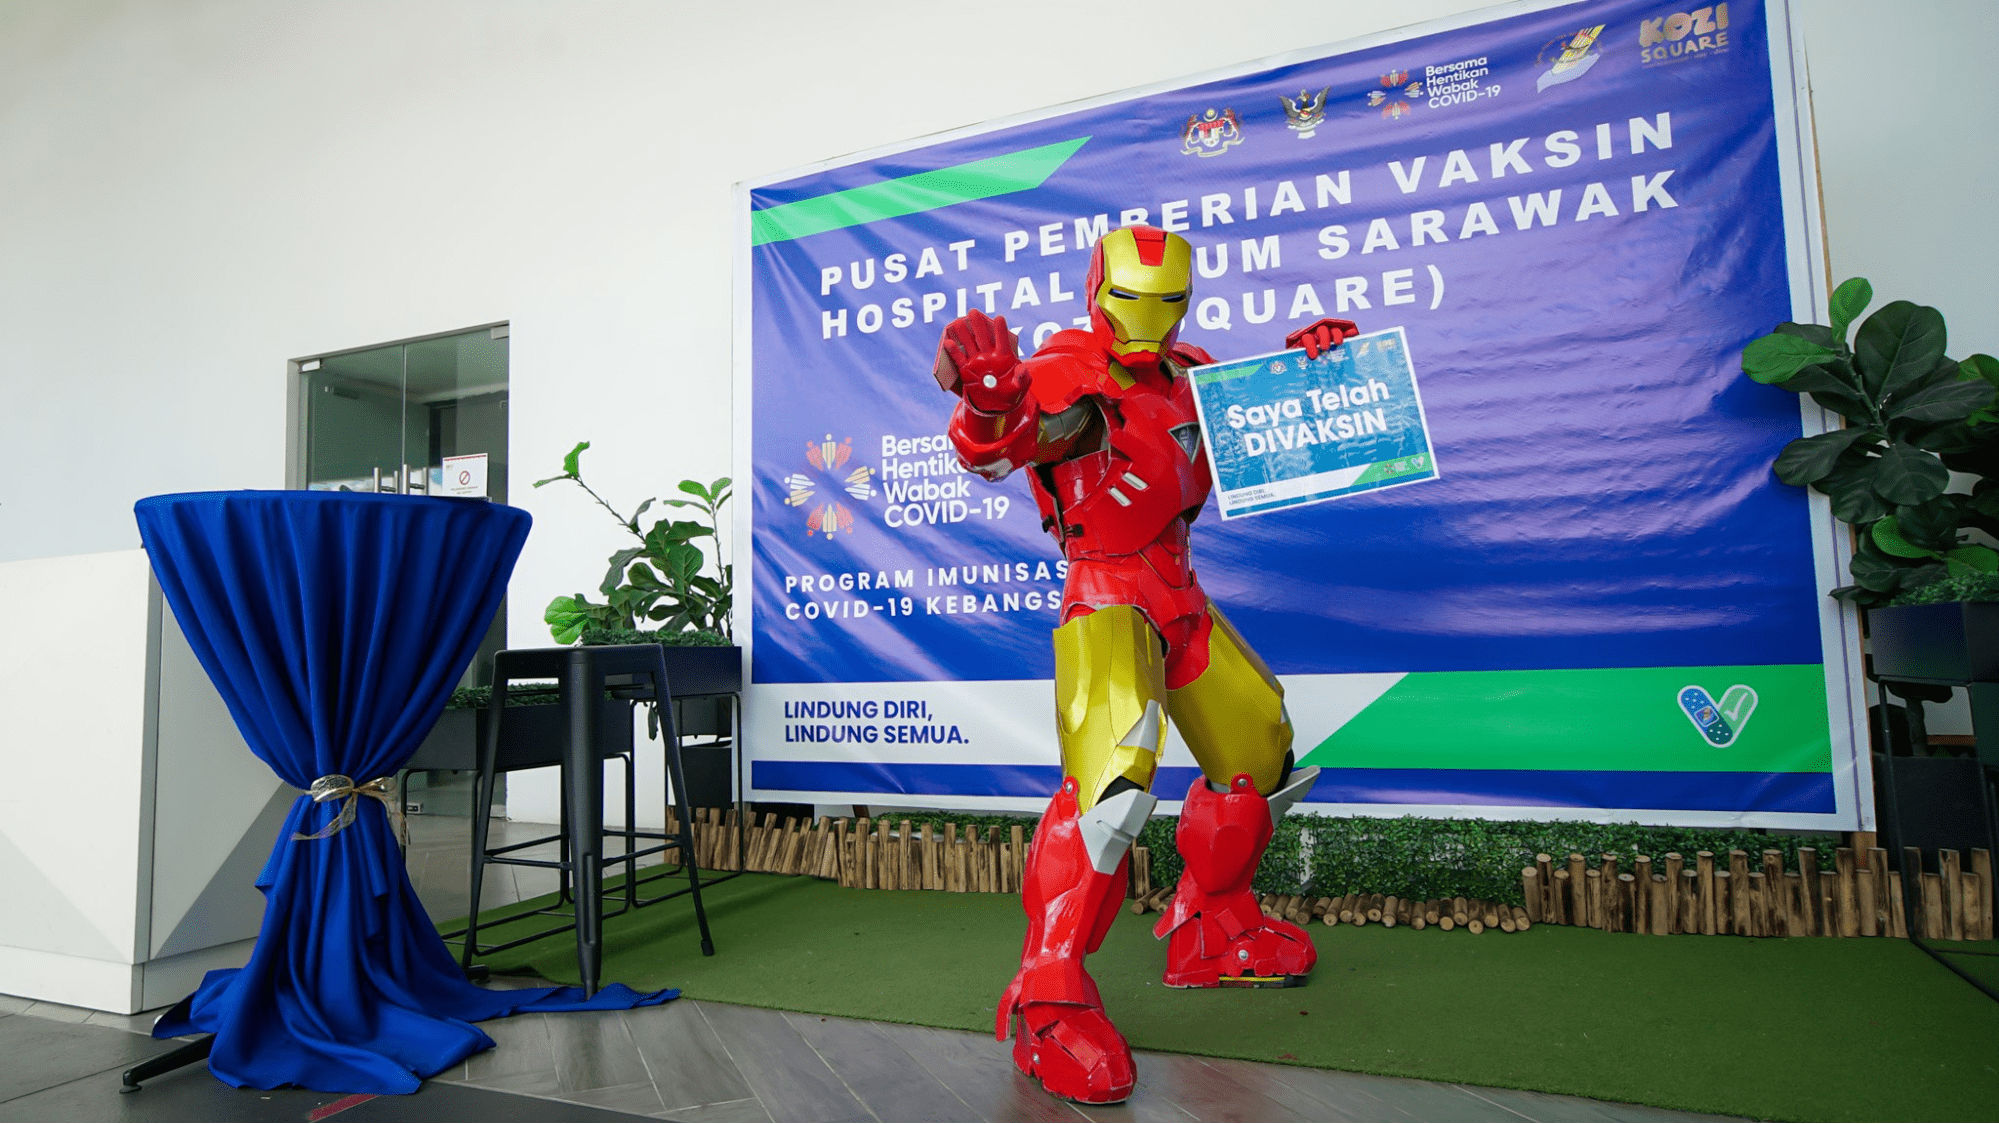 Malaysians wear costumes to vaccination - Iron Man